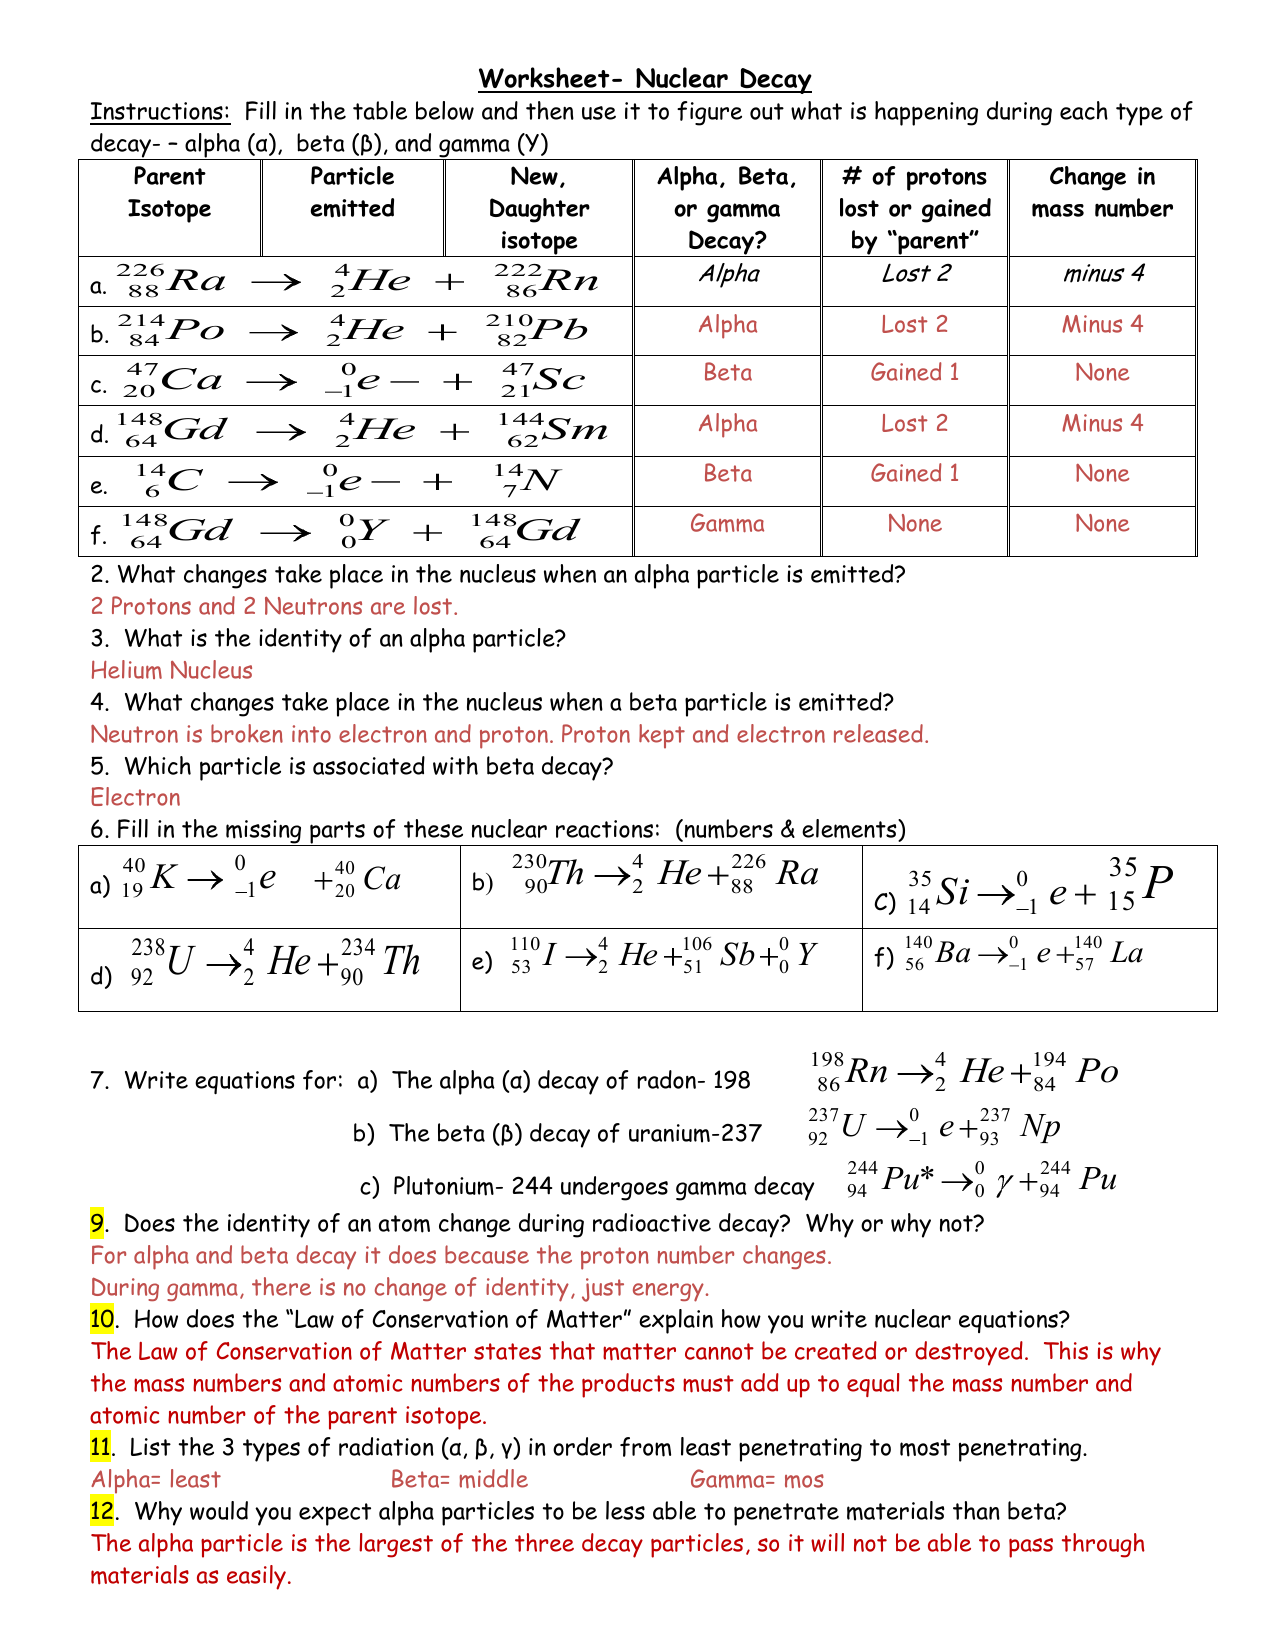 Worksheet- Nuclear Decay With Nuclear Decay Worksheet Answers